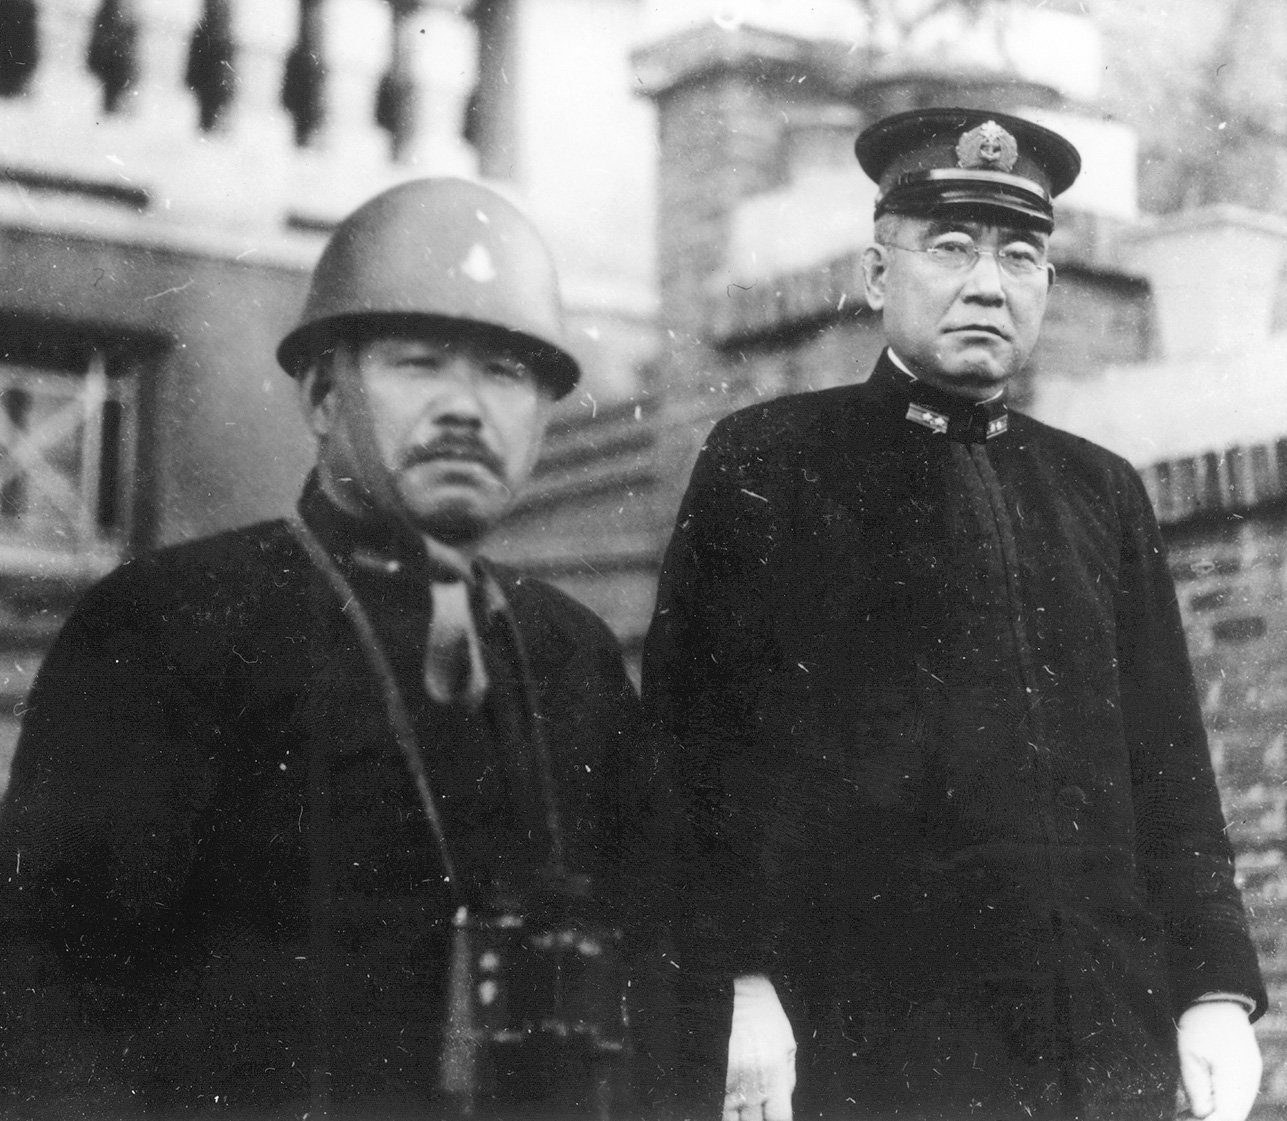 Rear Admiral Shiozawa (left) stands with Vice Admiral Kichisaburo Nomura, who later became Japanese ambassador to the U.S. Nomura visited Secretary of State Cordell Hull on the day of the Pearl Harbor attack.